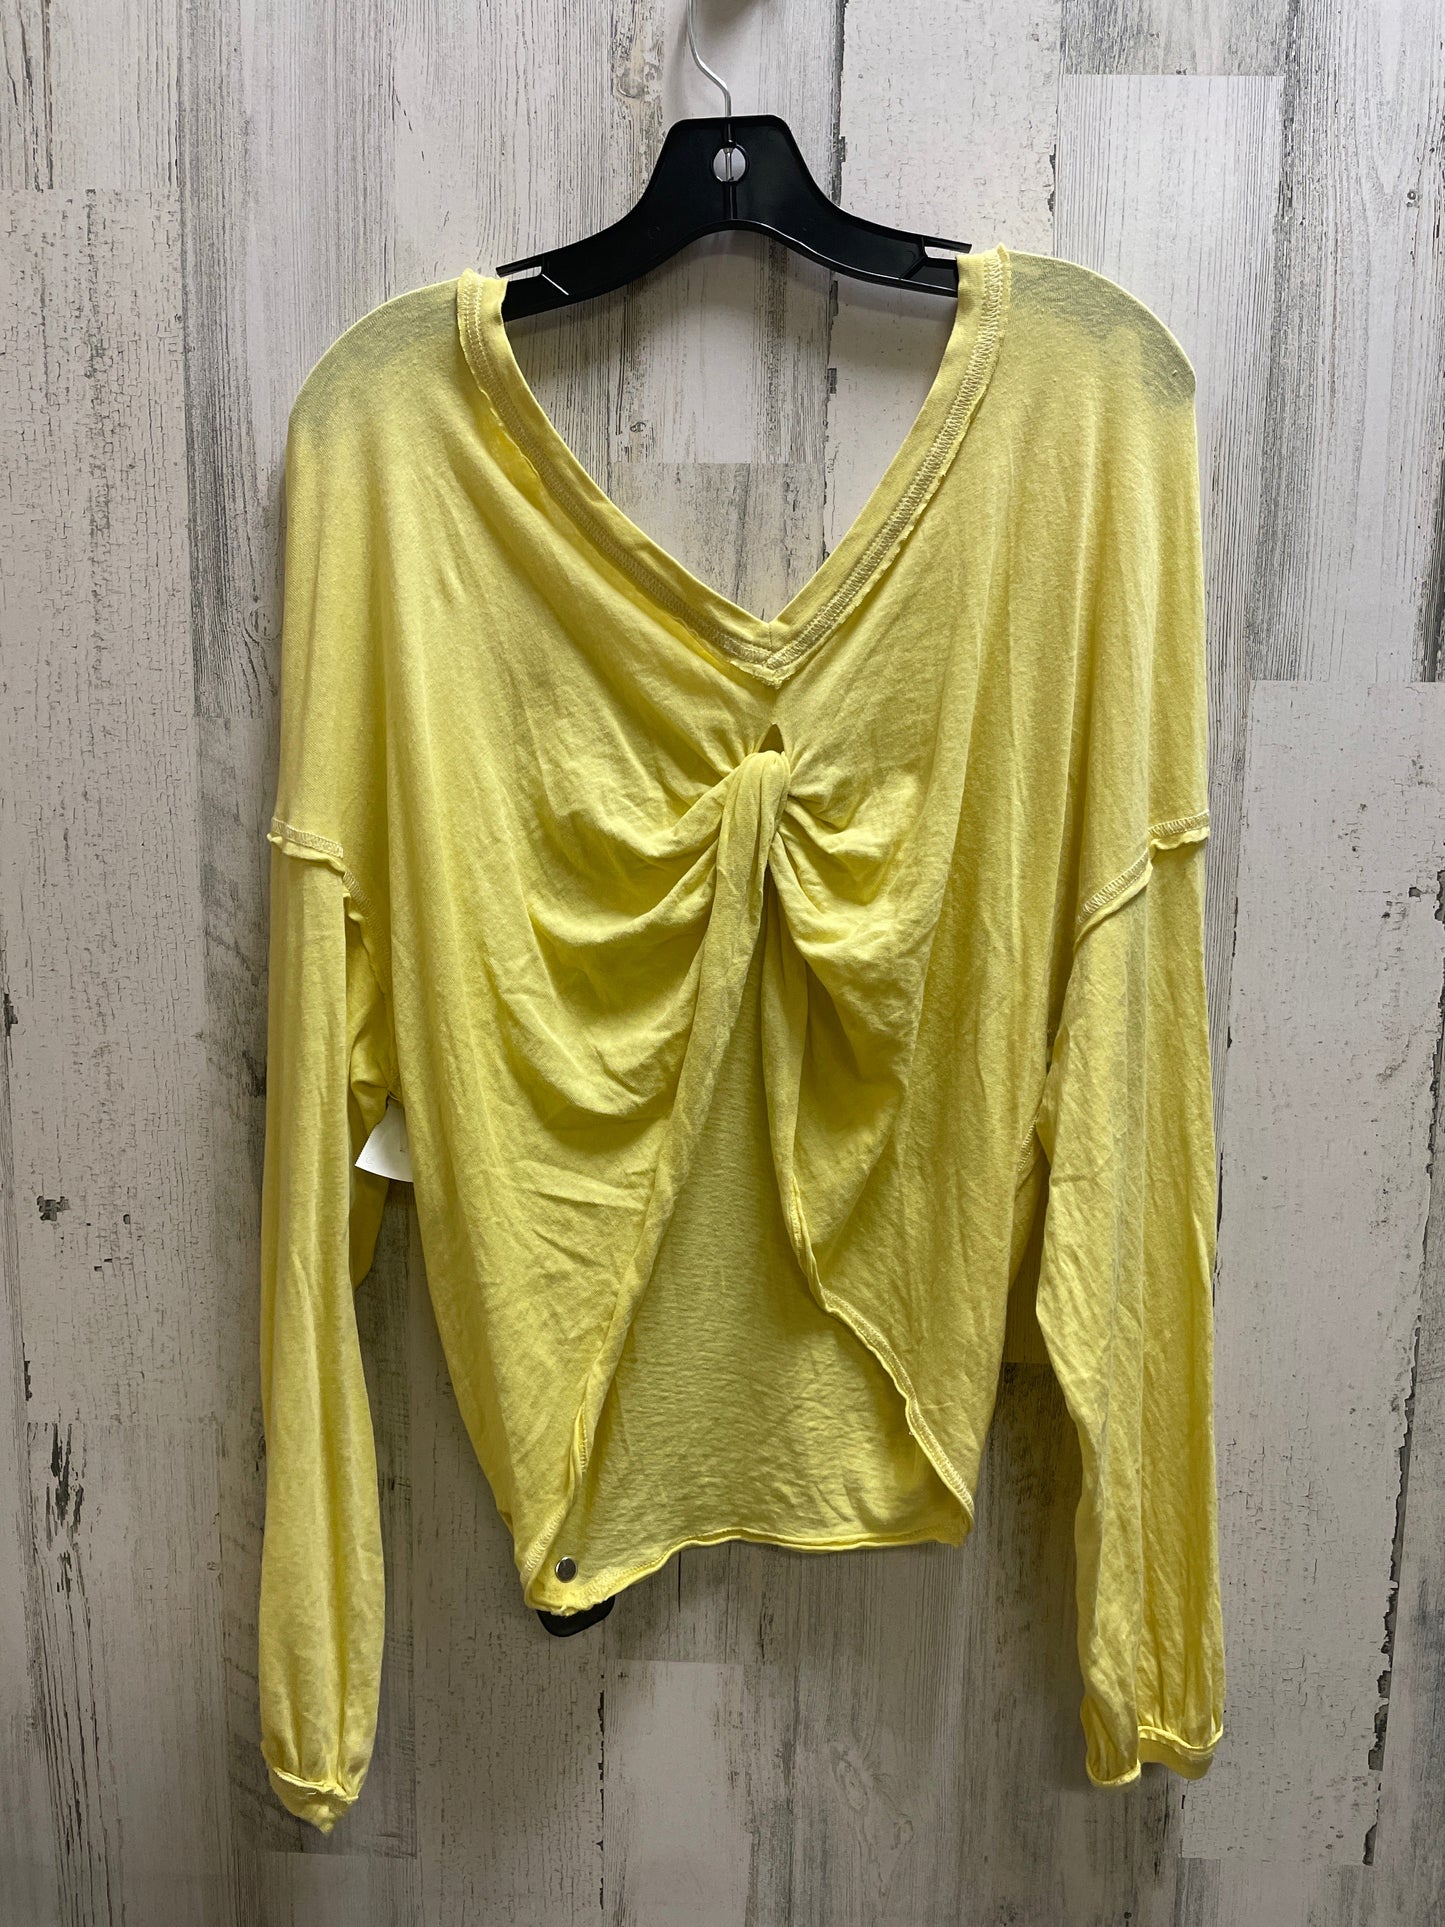 Yellow Top Long Sleeve Free People, Size S